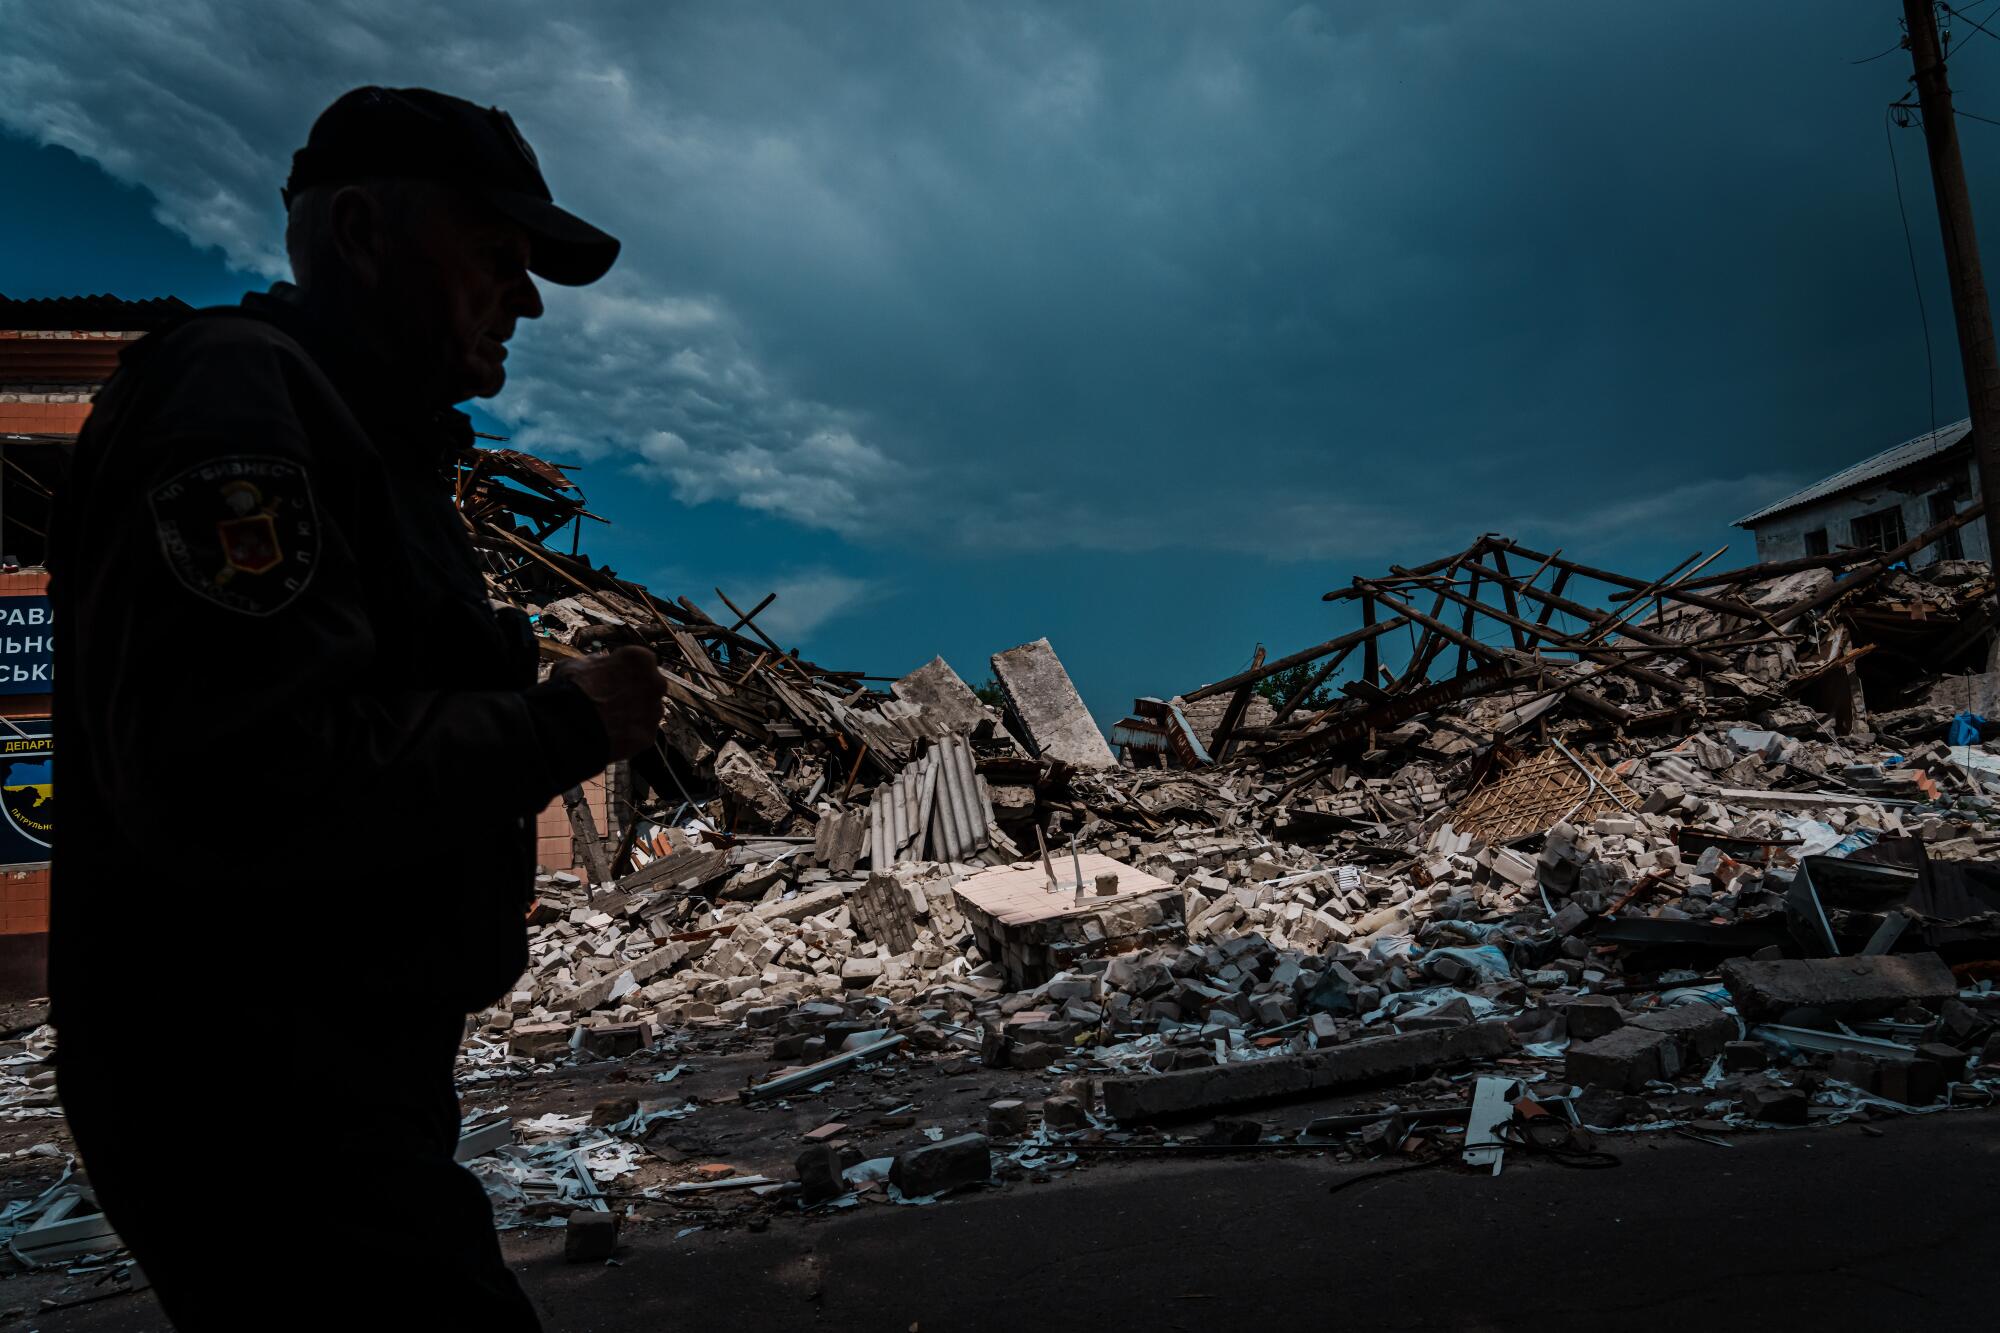 A security guard walks by the rubble of a police station that was destroyed by bombardment, in Lysychansk, Ukraine.